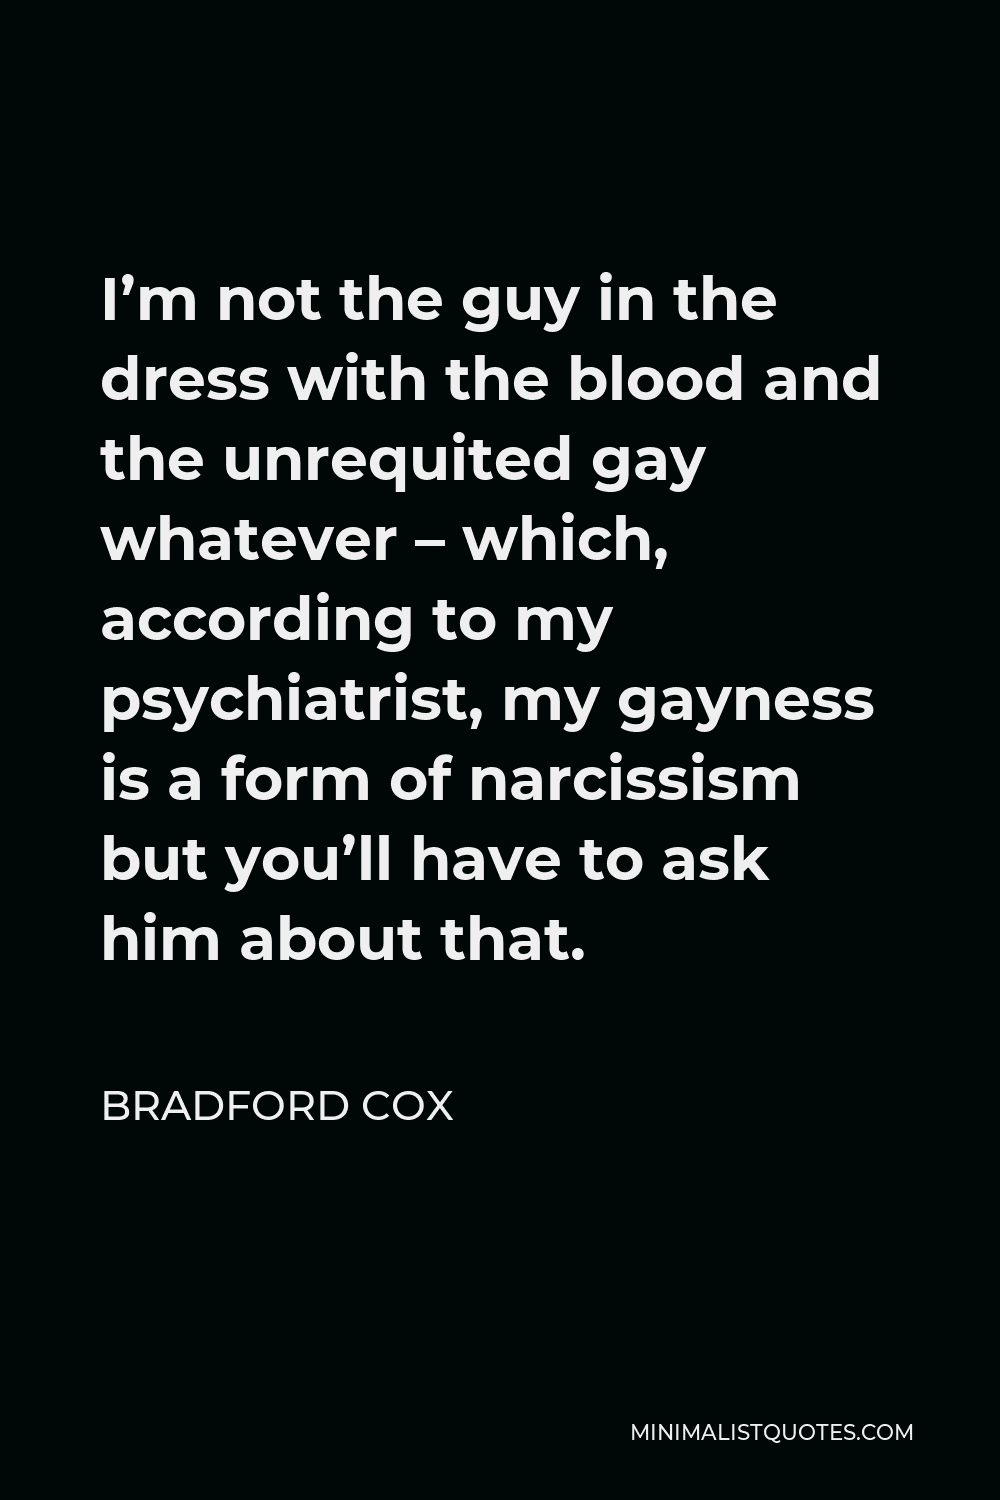 Bradford Cox Quote - I’m not the guy in the dress with the blood and the unrequited gay whatever – which, according to my psychiatrist, my gayness is a form of narcissism but you’ll have to ask him about that.